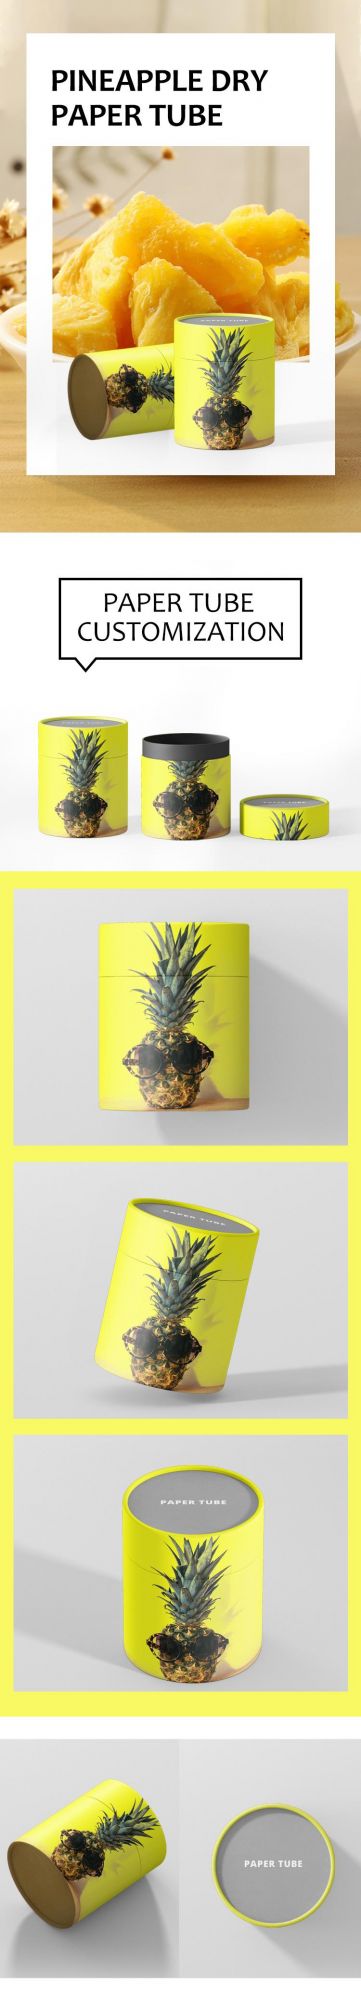 Firstsail Custom Printed Luxury Nut Dried Fruit Paper Food Can Packaging Dry Pineapple Vegetables Cylinder Tube Box